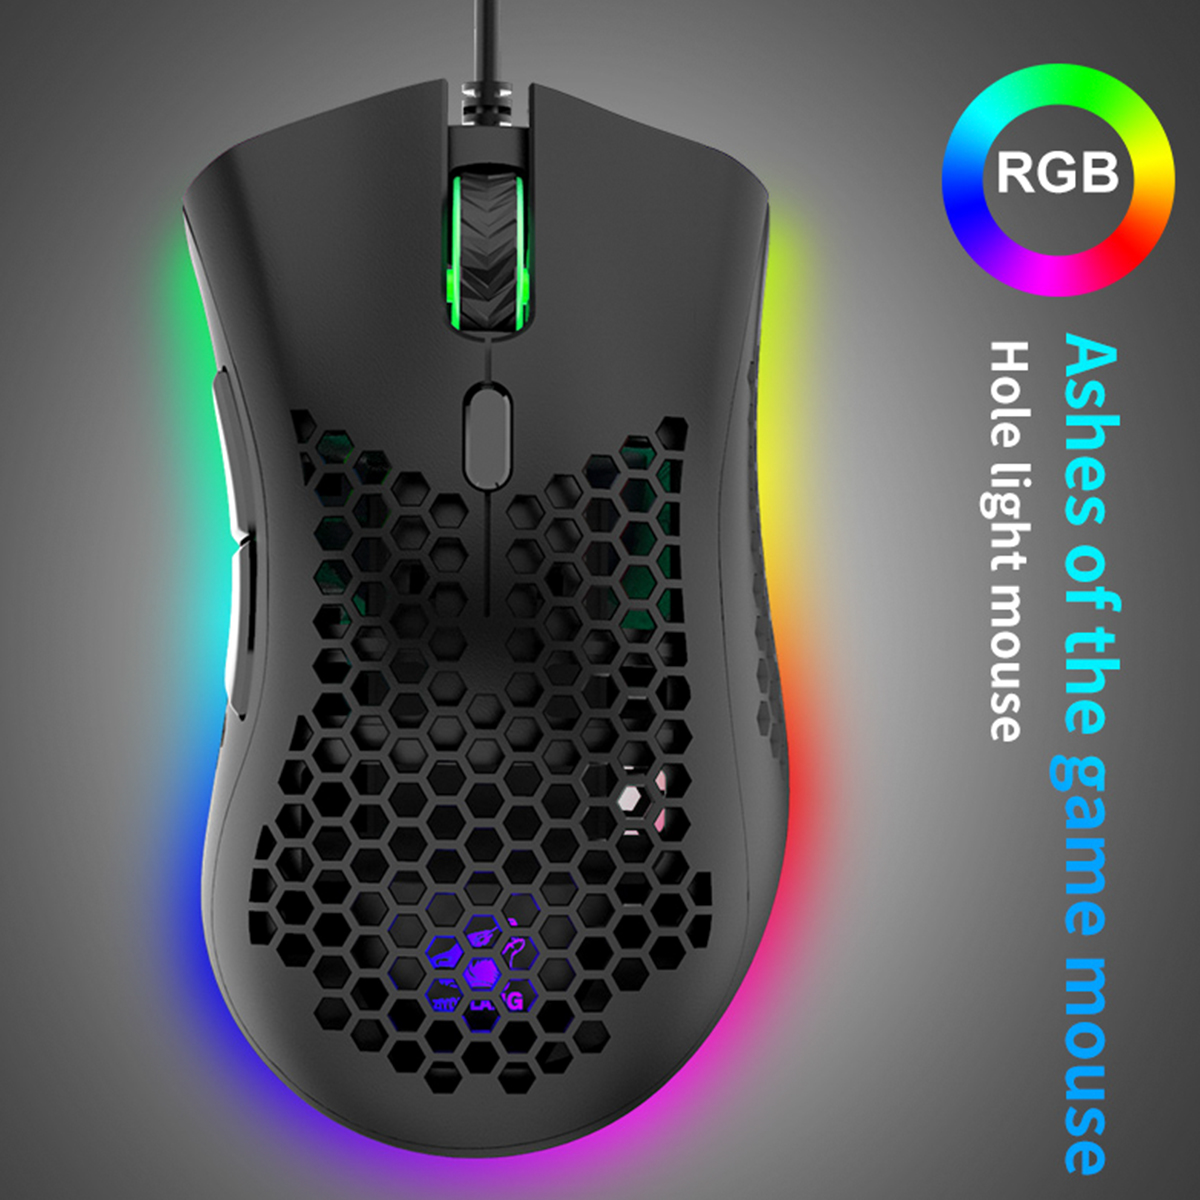 Wired-Gaming-Mouse-RGB-Lamp-12000DPI-Lightweight-For-LaptopDesktop-1740875-5